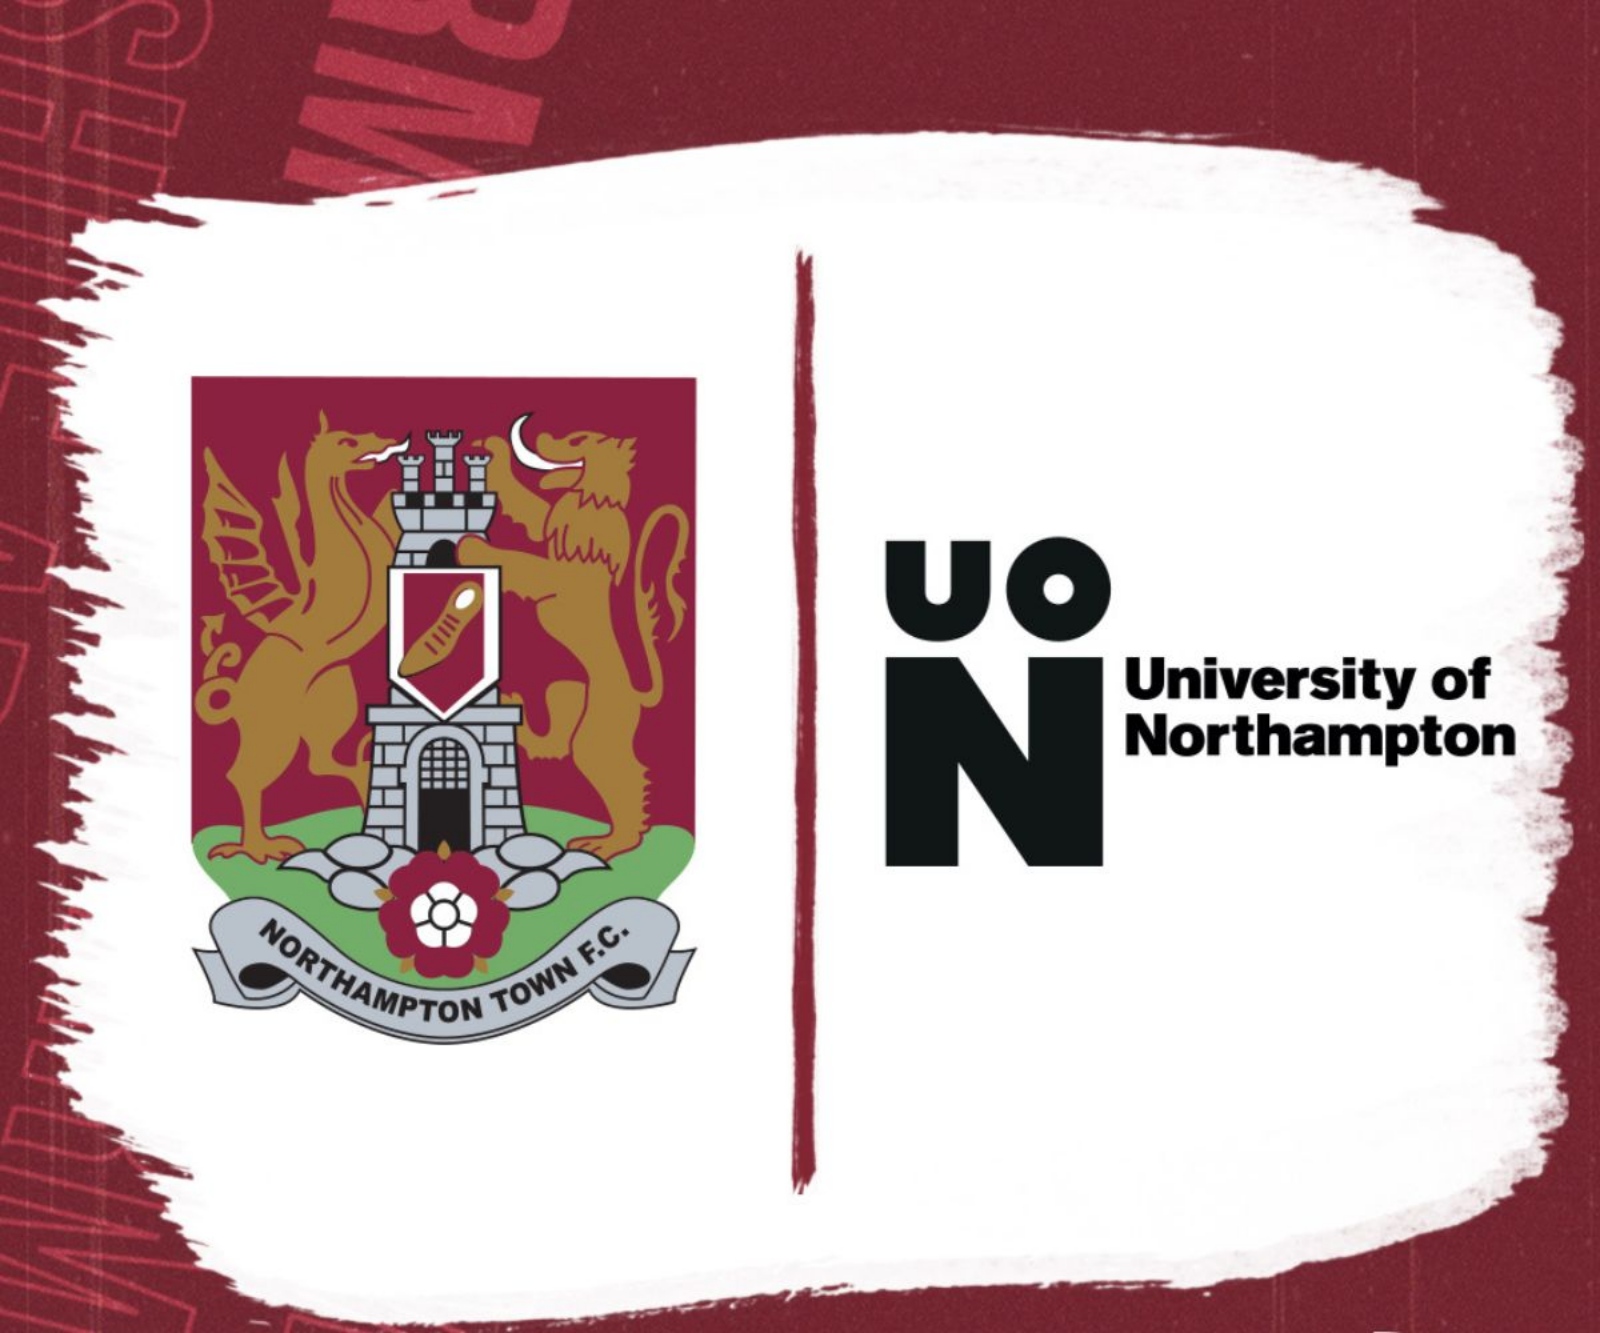 NTFC/Cobblers and UON logos